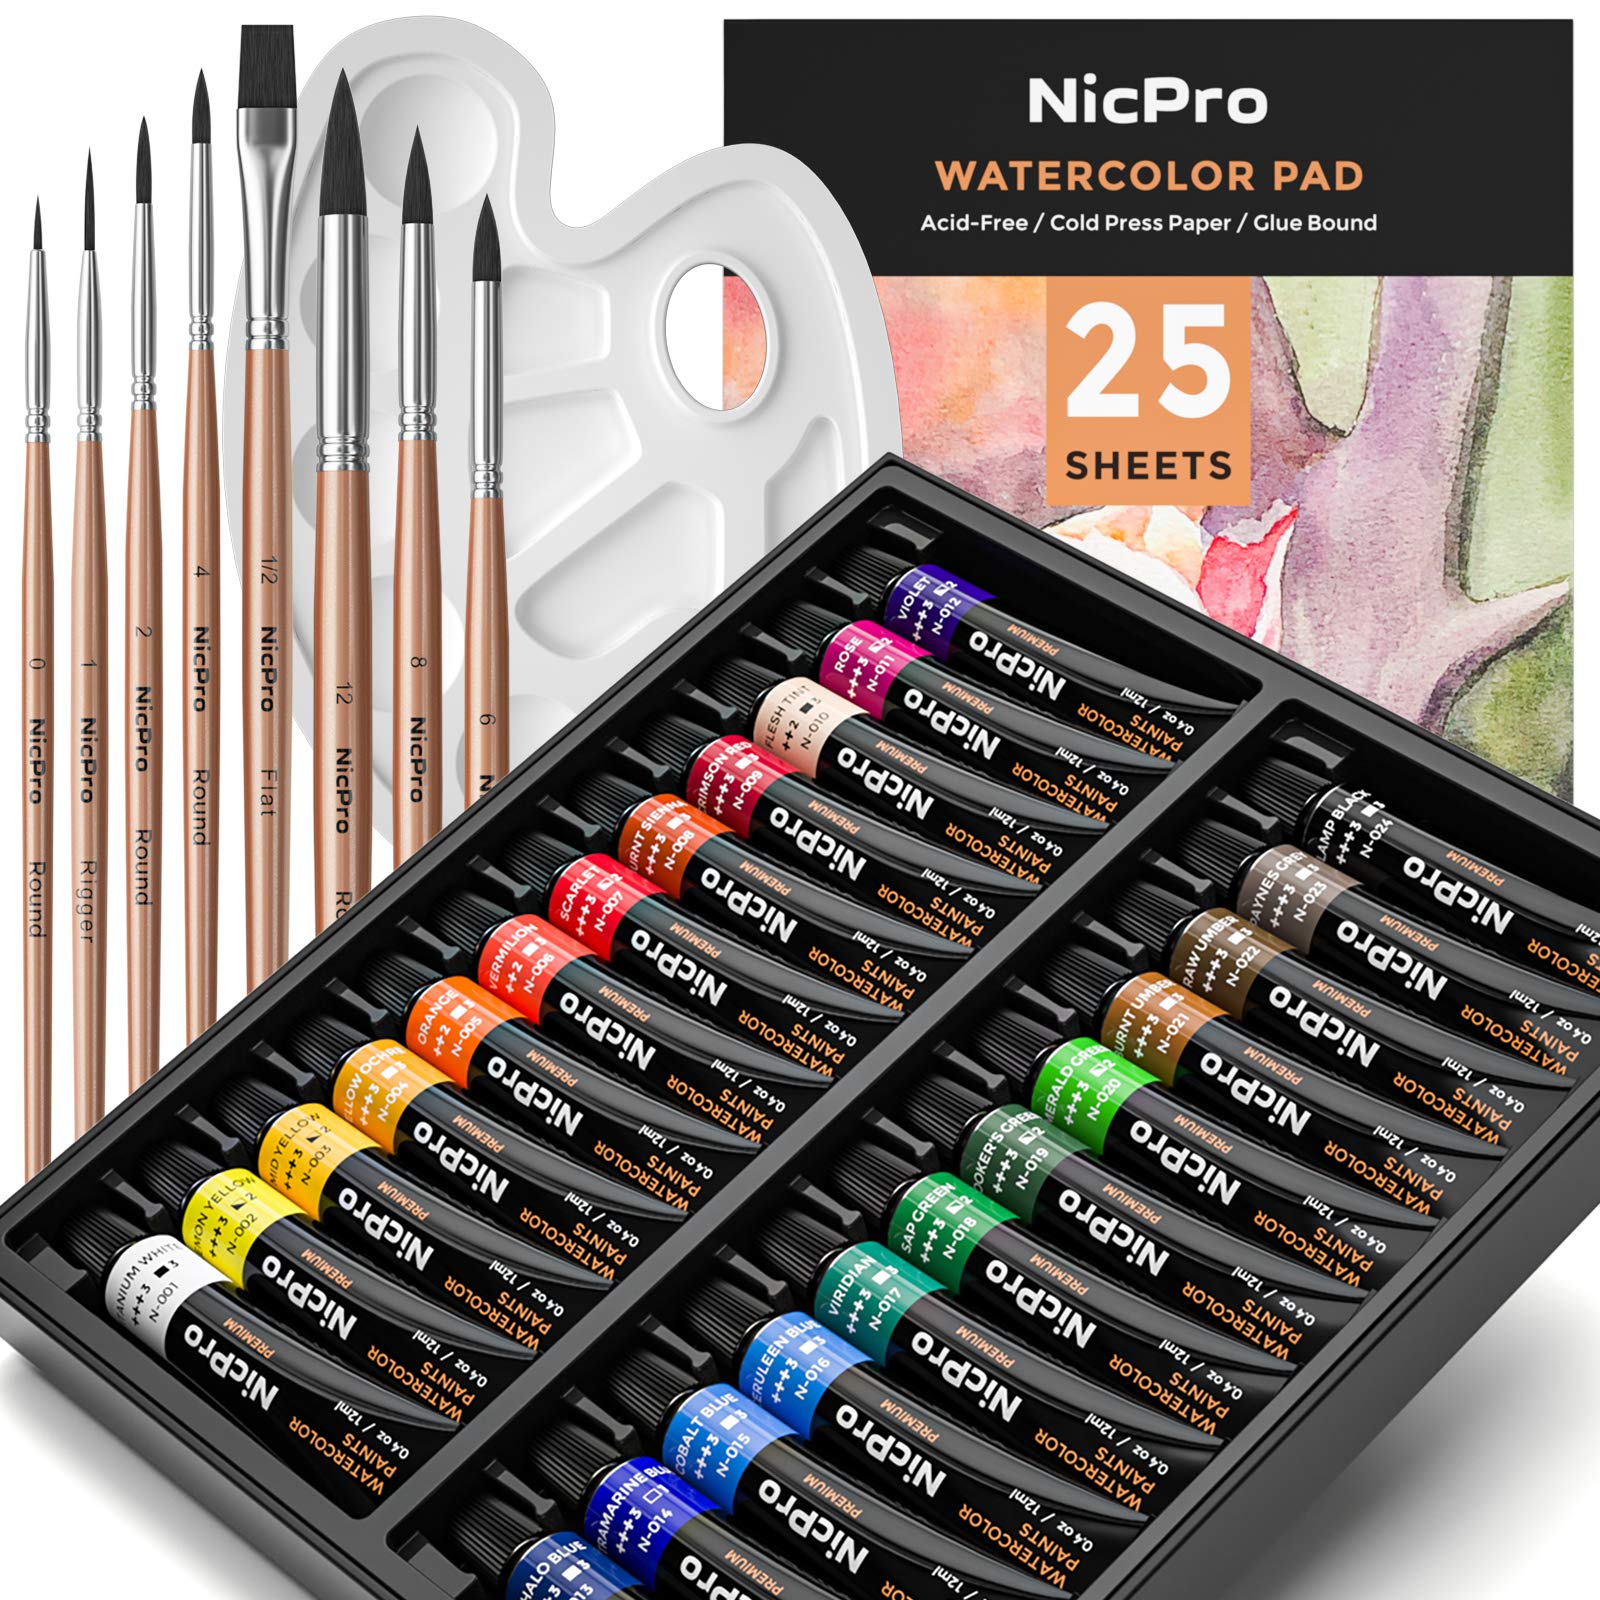 Nicpro Watercolor Paint Kit Professional Painting Supplies Set 24 Tube  Water Color Paints 8 Synthetic Squirrel Brushes 25 Art Pad Papers Palette  Color Wheel for Artists Students Kids Adults